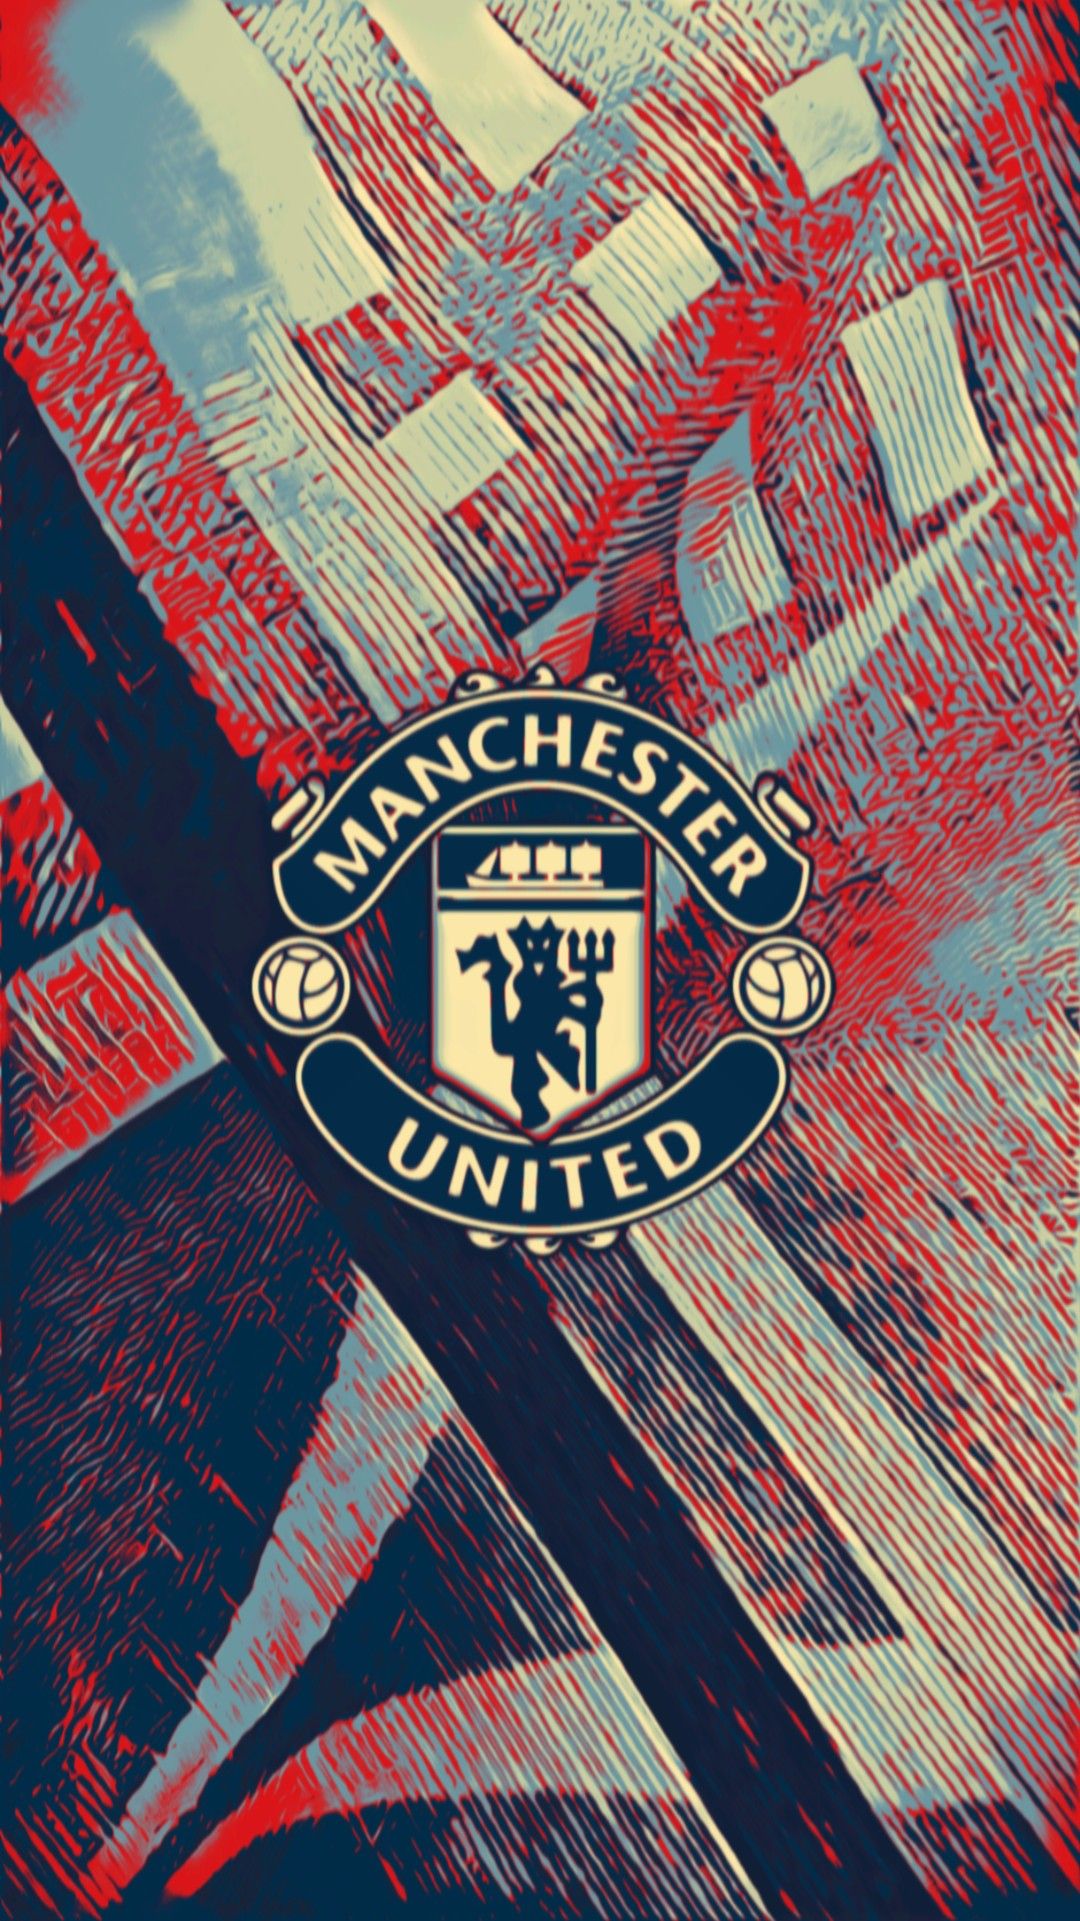 Manchester United Forever ❤️ ideas. manchester united, manchester, manchester united football